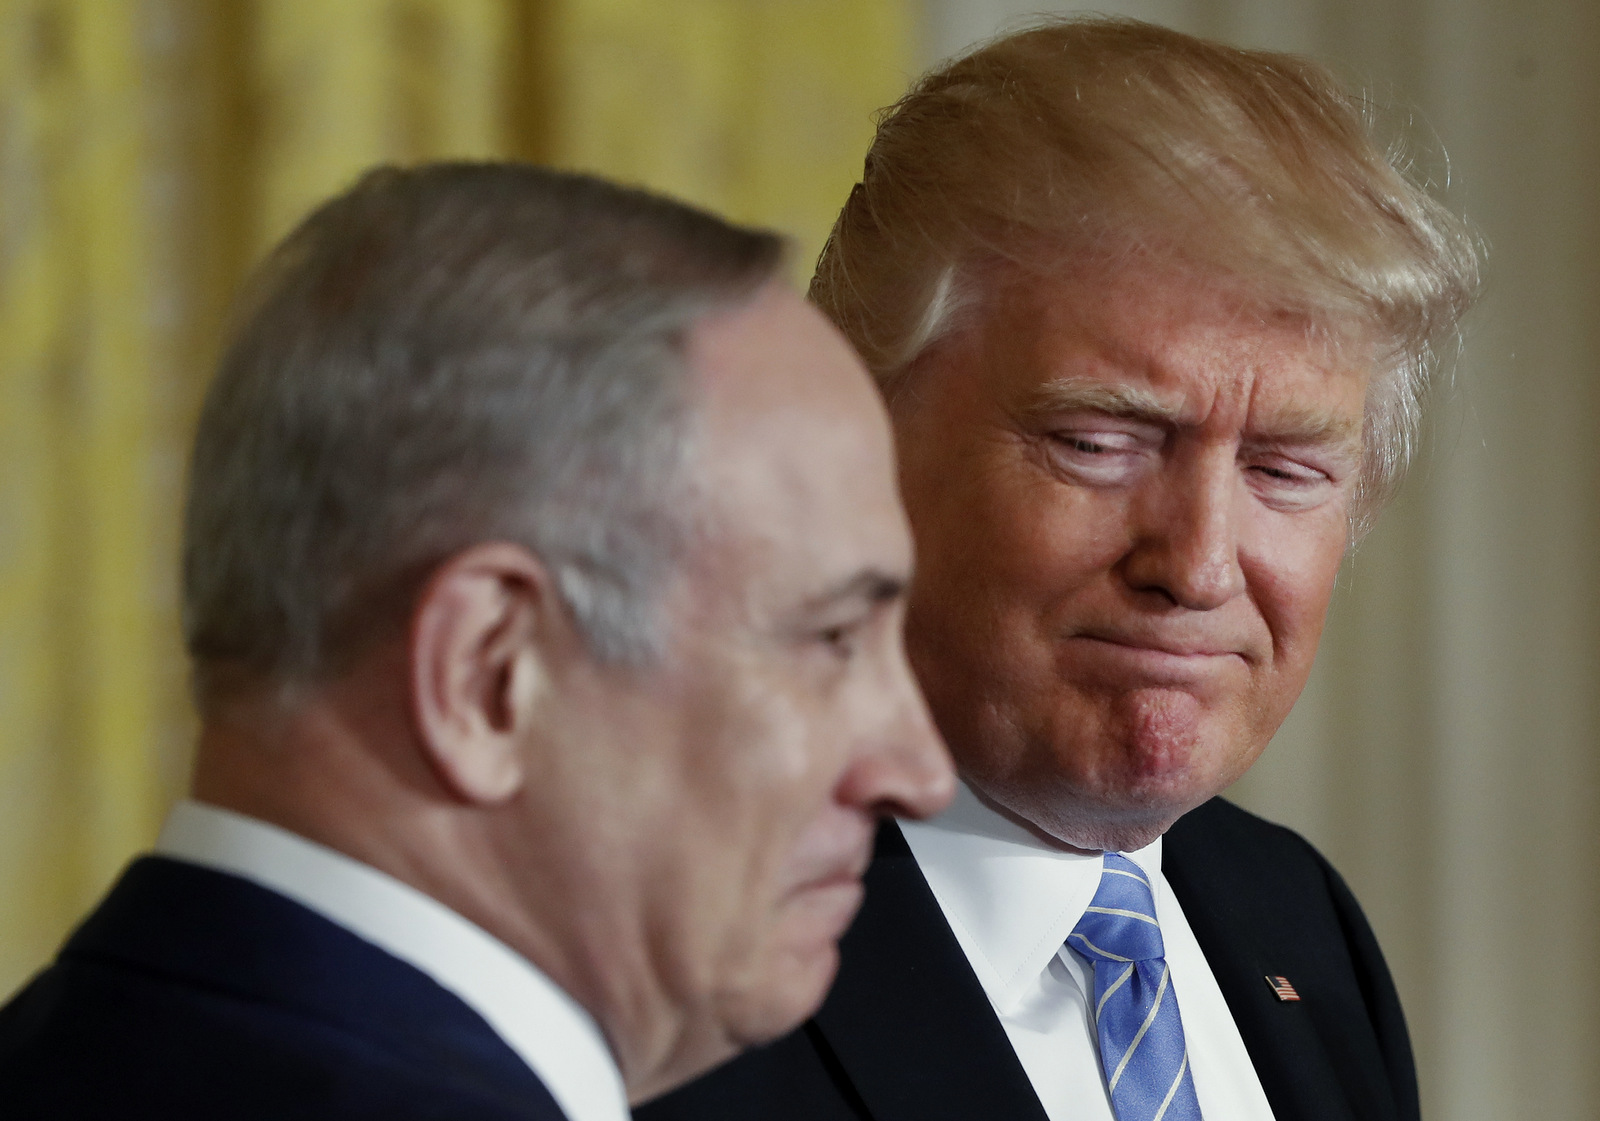 President Donald Trump and Israeli Prime Minister Benjamin Netanyahu participate in a joint news conference in the East Room of the White House in Washington, Wednesday, Feb. 15, 2017. (AP/Pablo Martinez Monsivais)